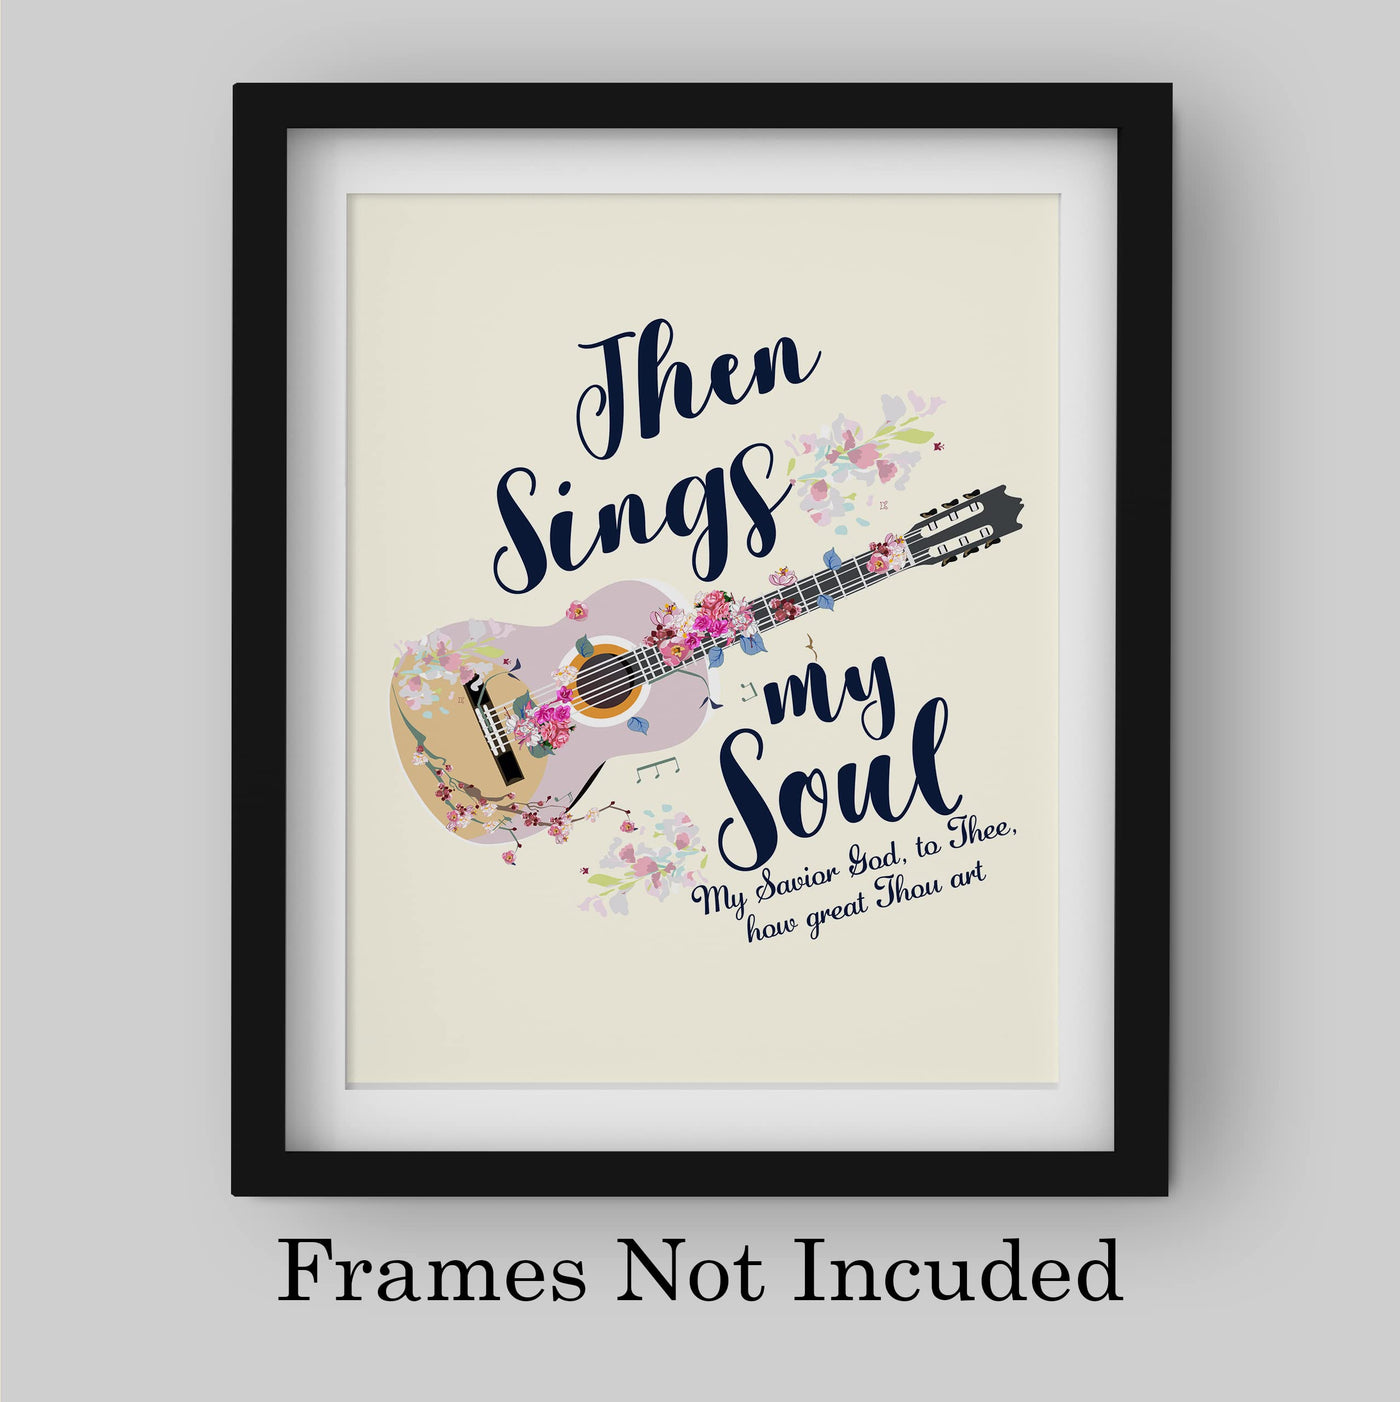 Then Sings My Soul, My Savior God to Thee Song Lyrics Wall Art -8 x 10" Christian Worship Music Print -Ready to Frame. Floral Guitar Print. Inspirational Home-Office-Church Decor & Religious Gifts!